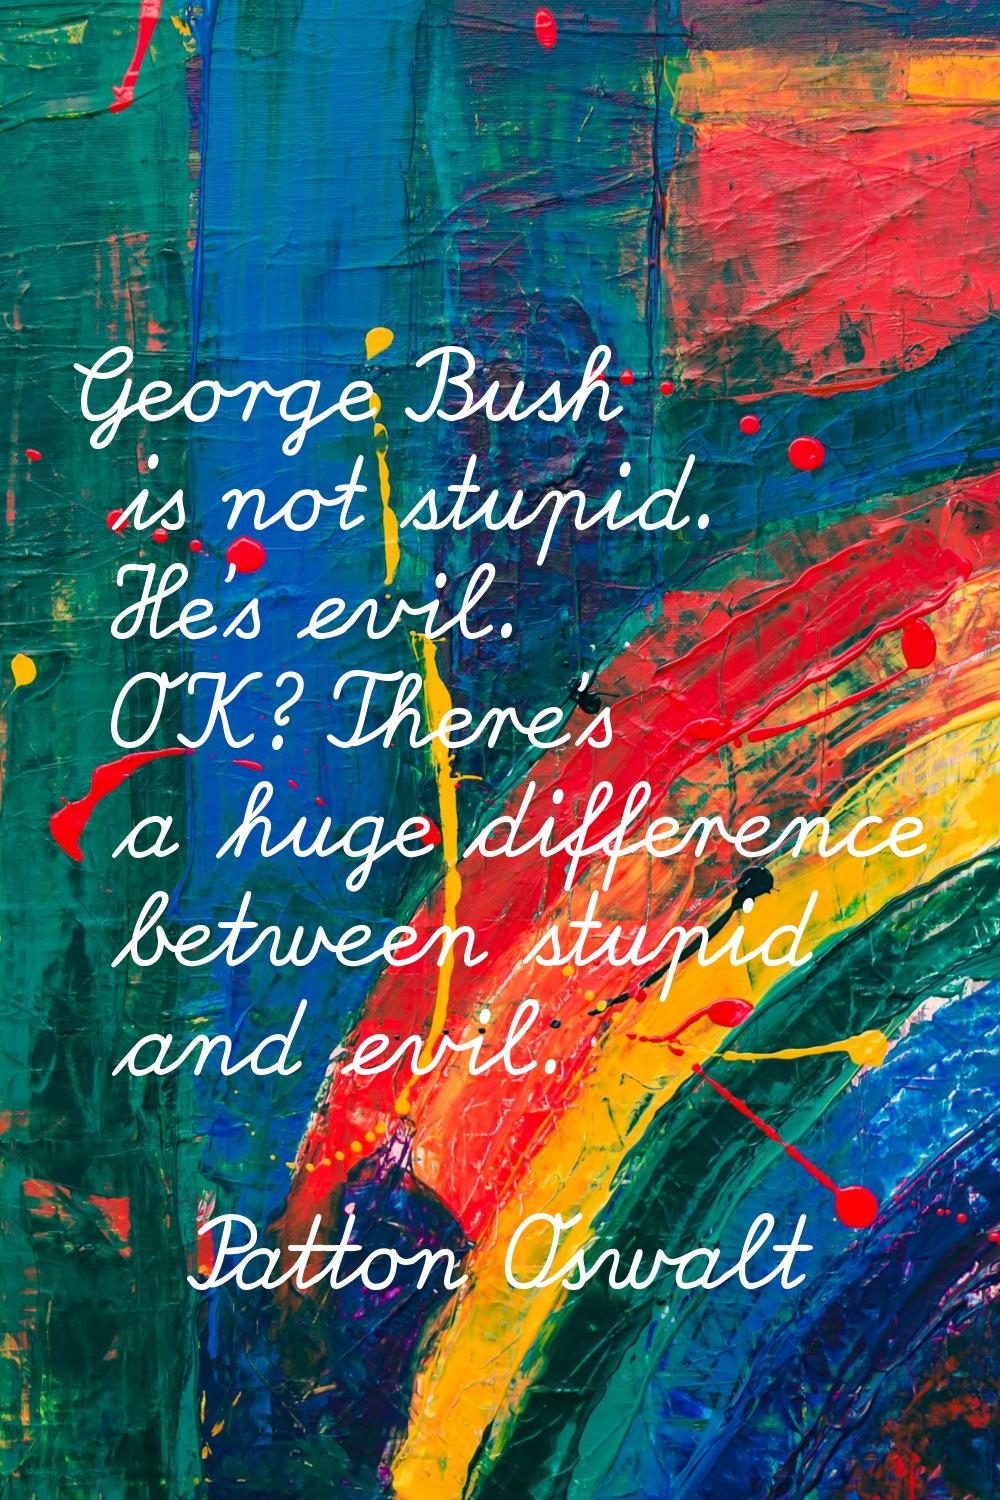 George Bush is not stupid. He's evil. OK? There's a huge difference between stupid and evil.